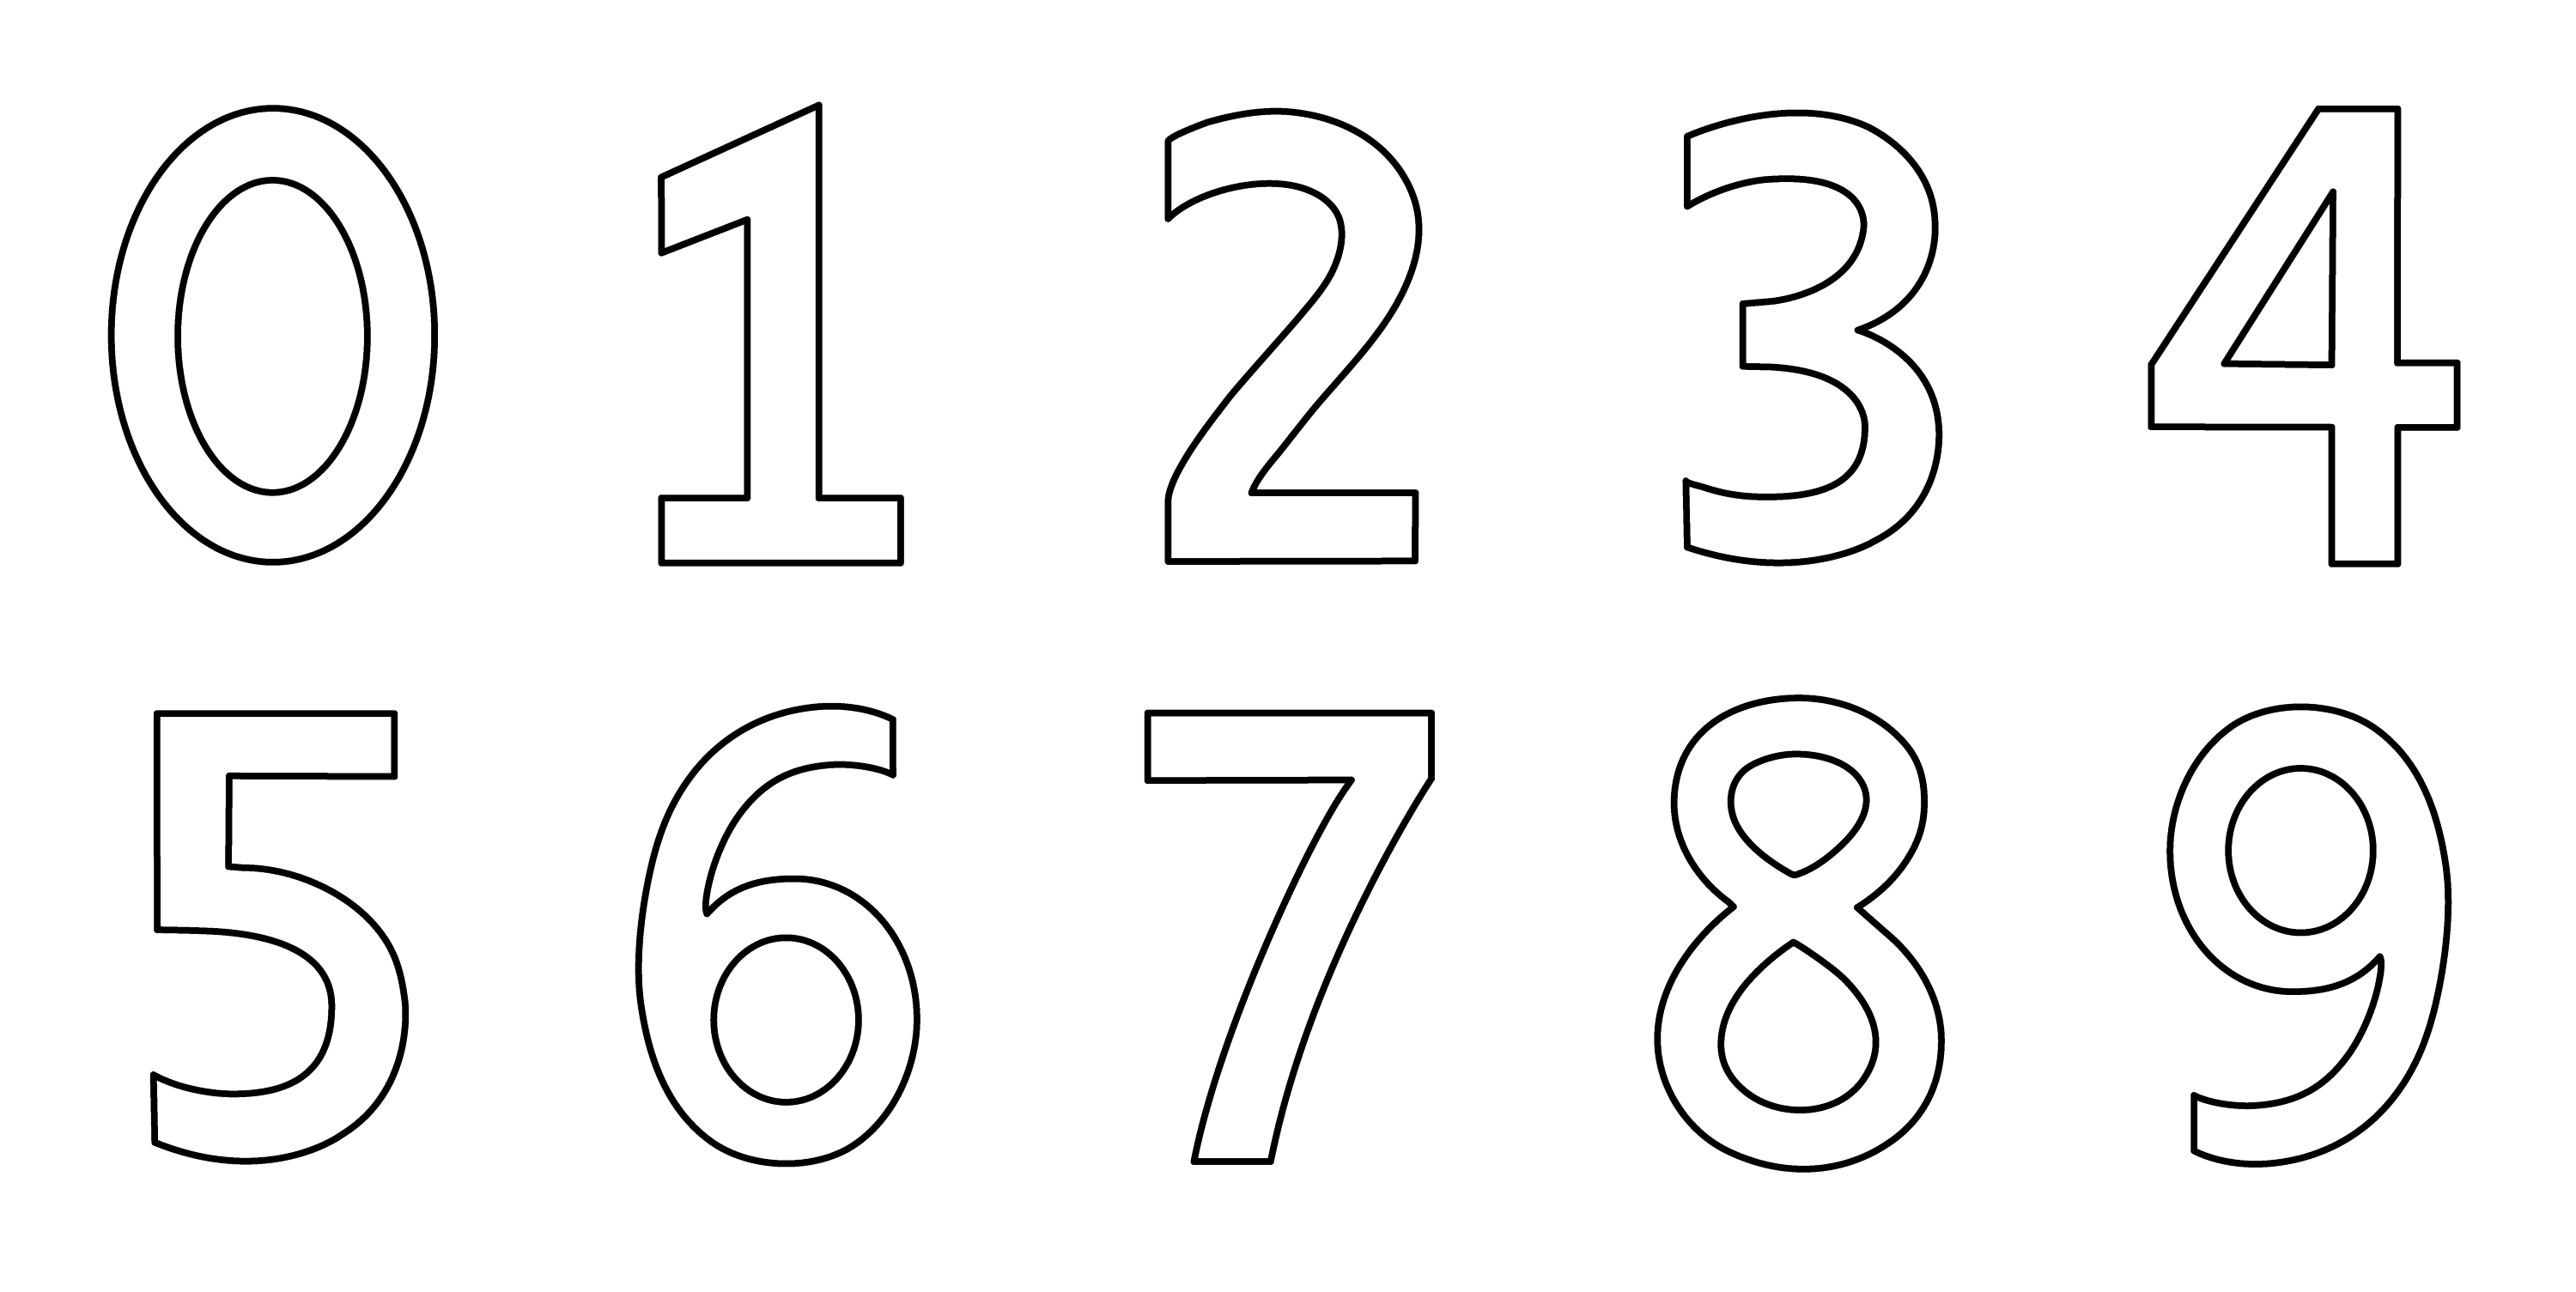 clipart numbers black and white - photo #13